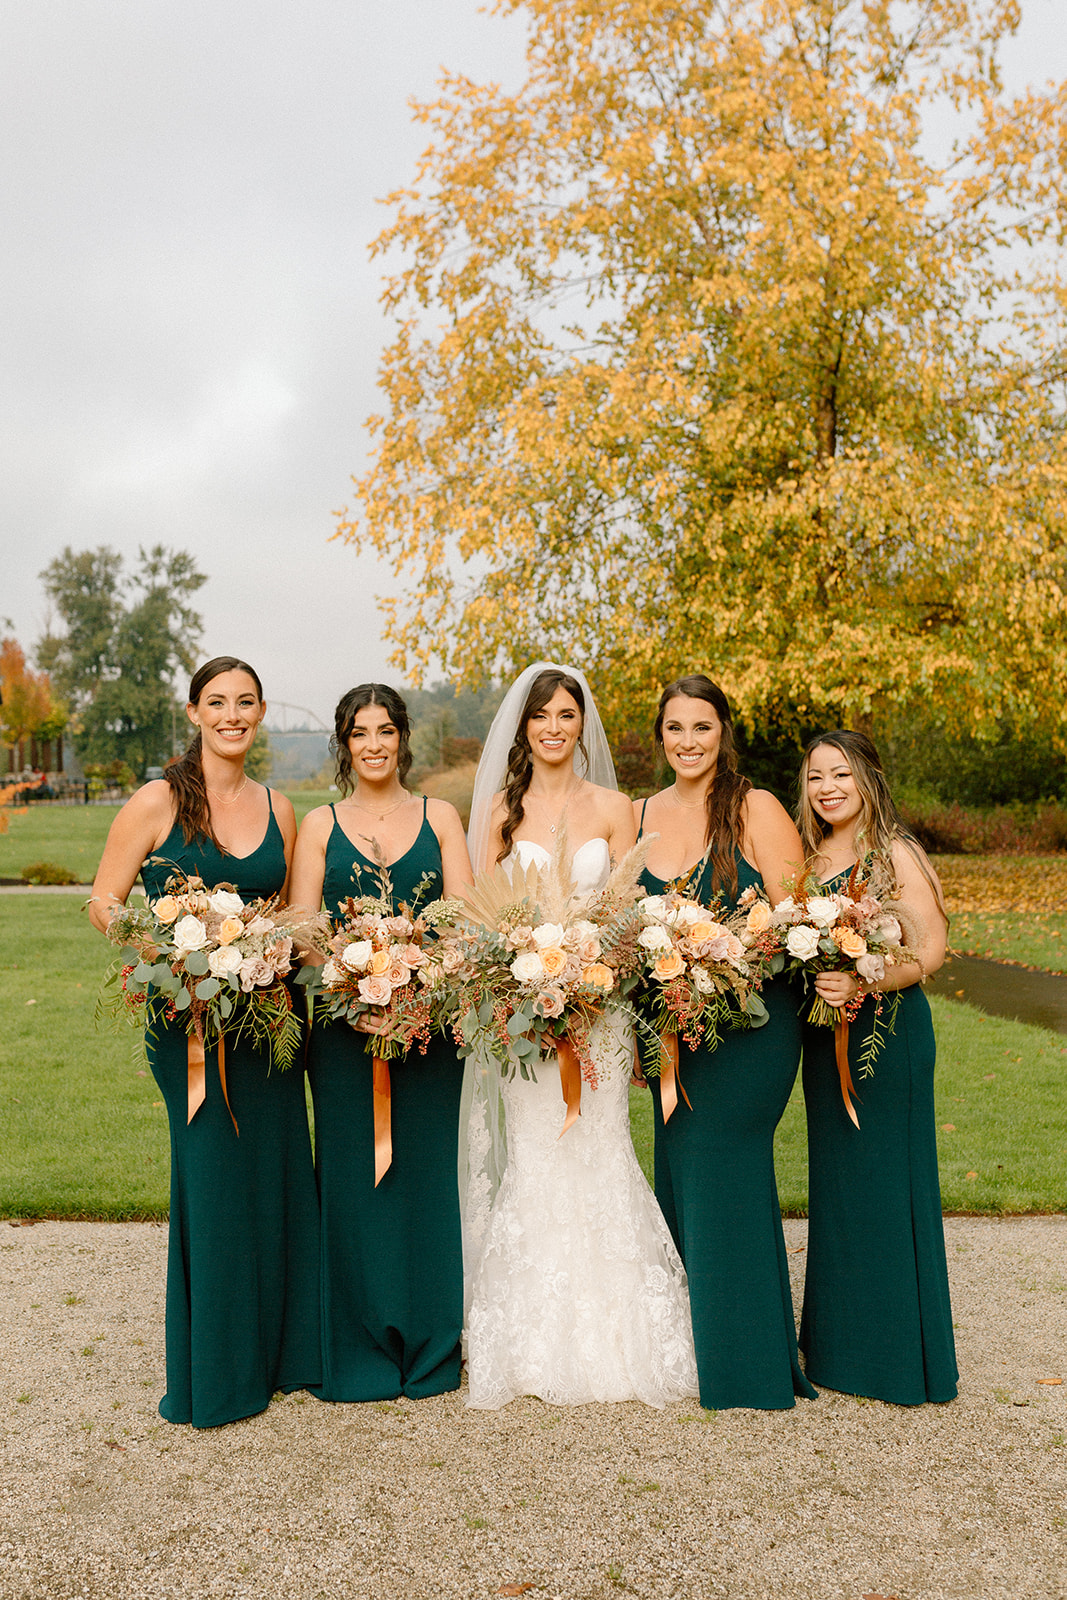 Outdoor Wedding Day with golden hour photos captured by PNW Wedding Photographer